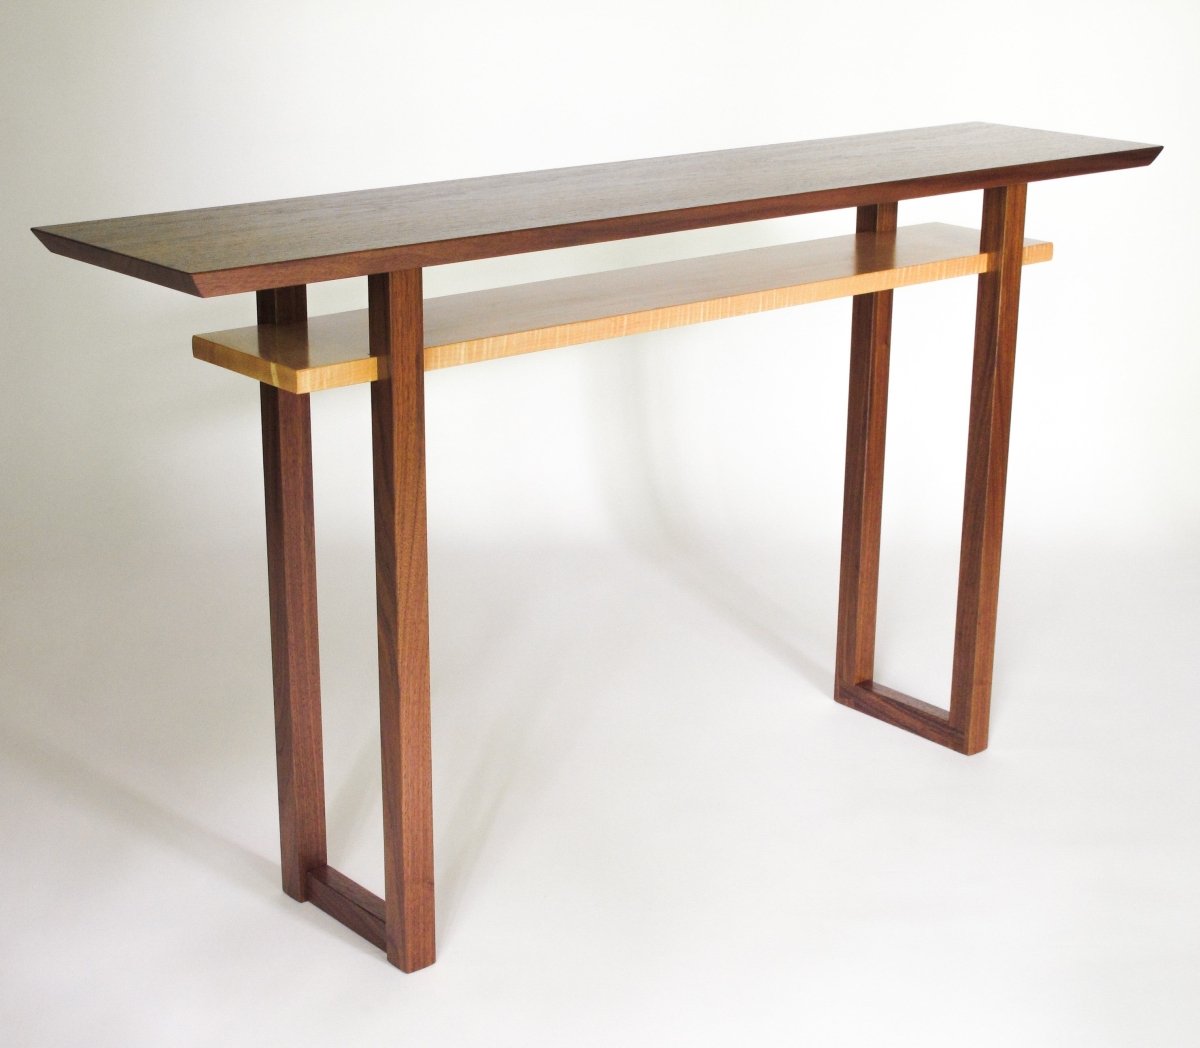 A walnut console table narrow for hallway decorating by Mokuzai Furniture.